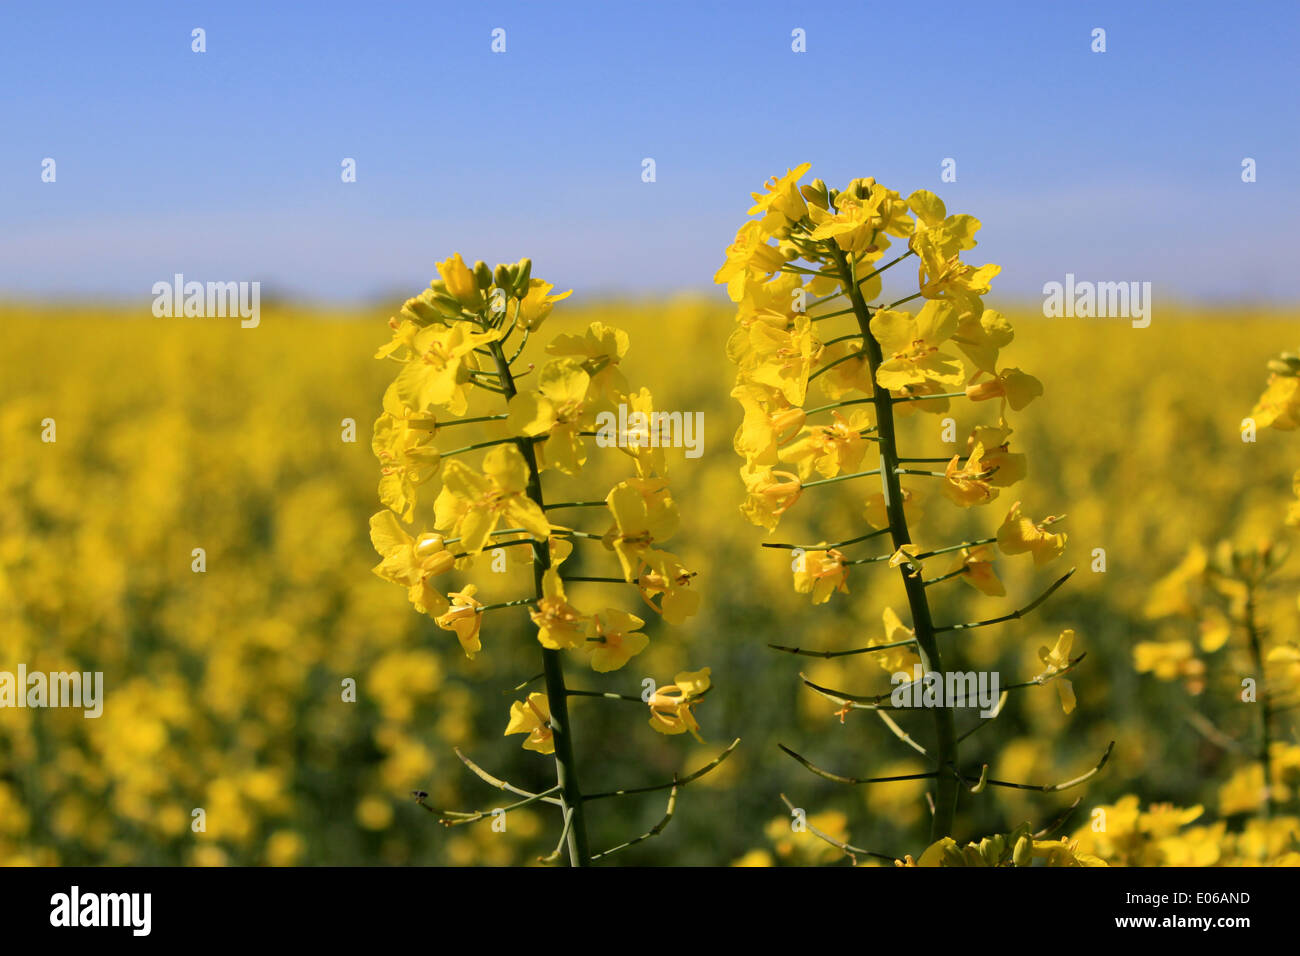 photo flower stems rape in the foreground against a background of a field of oilseed rape blurred horizon with blue sky Stock Photo